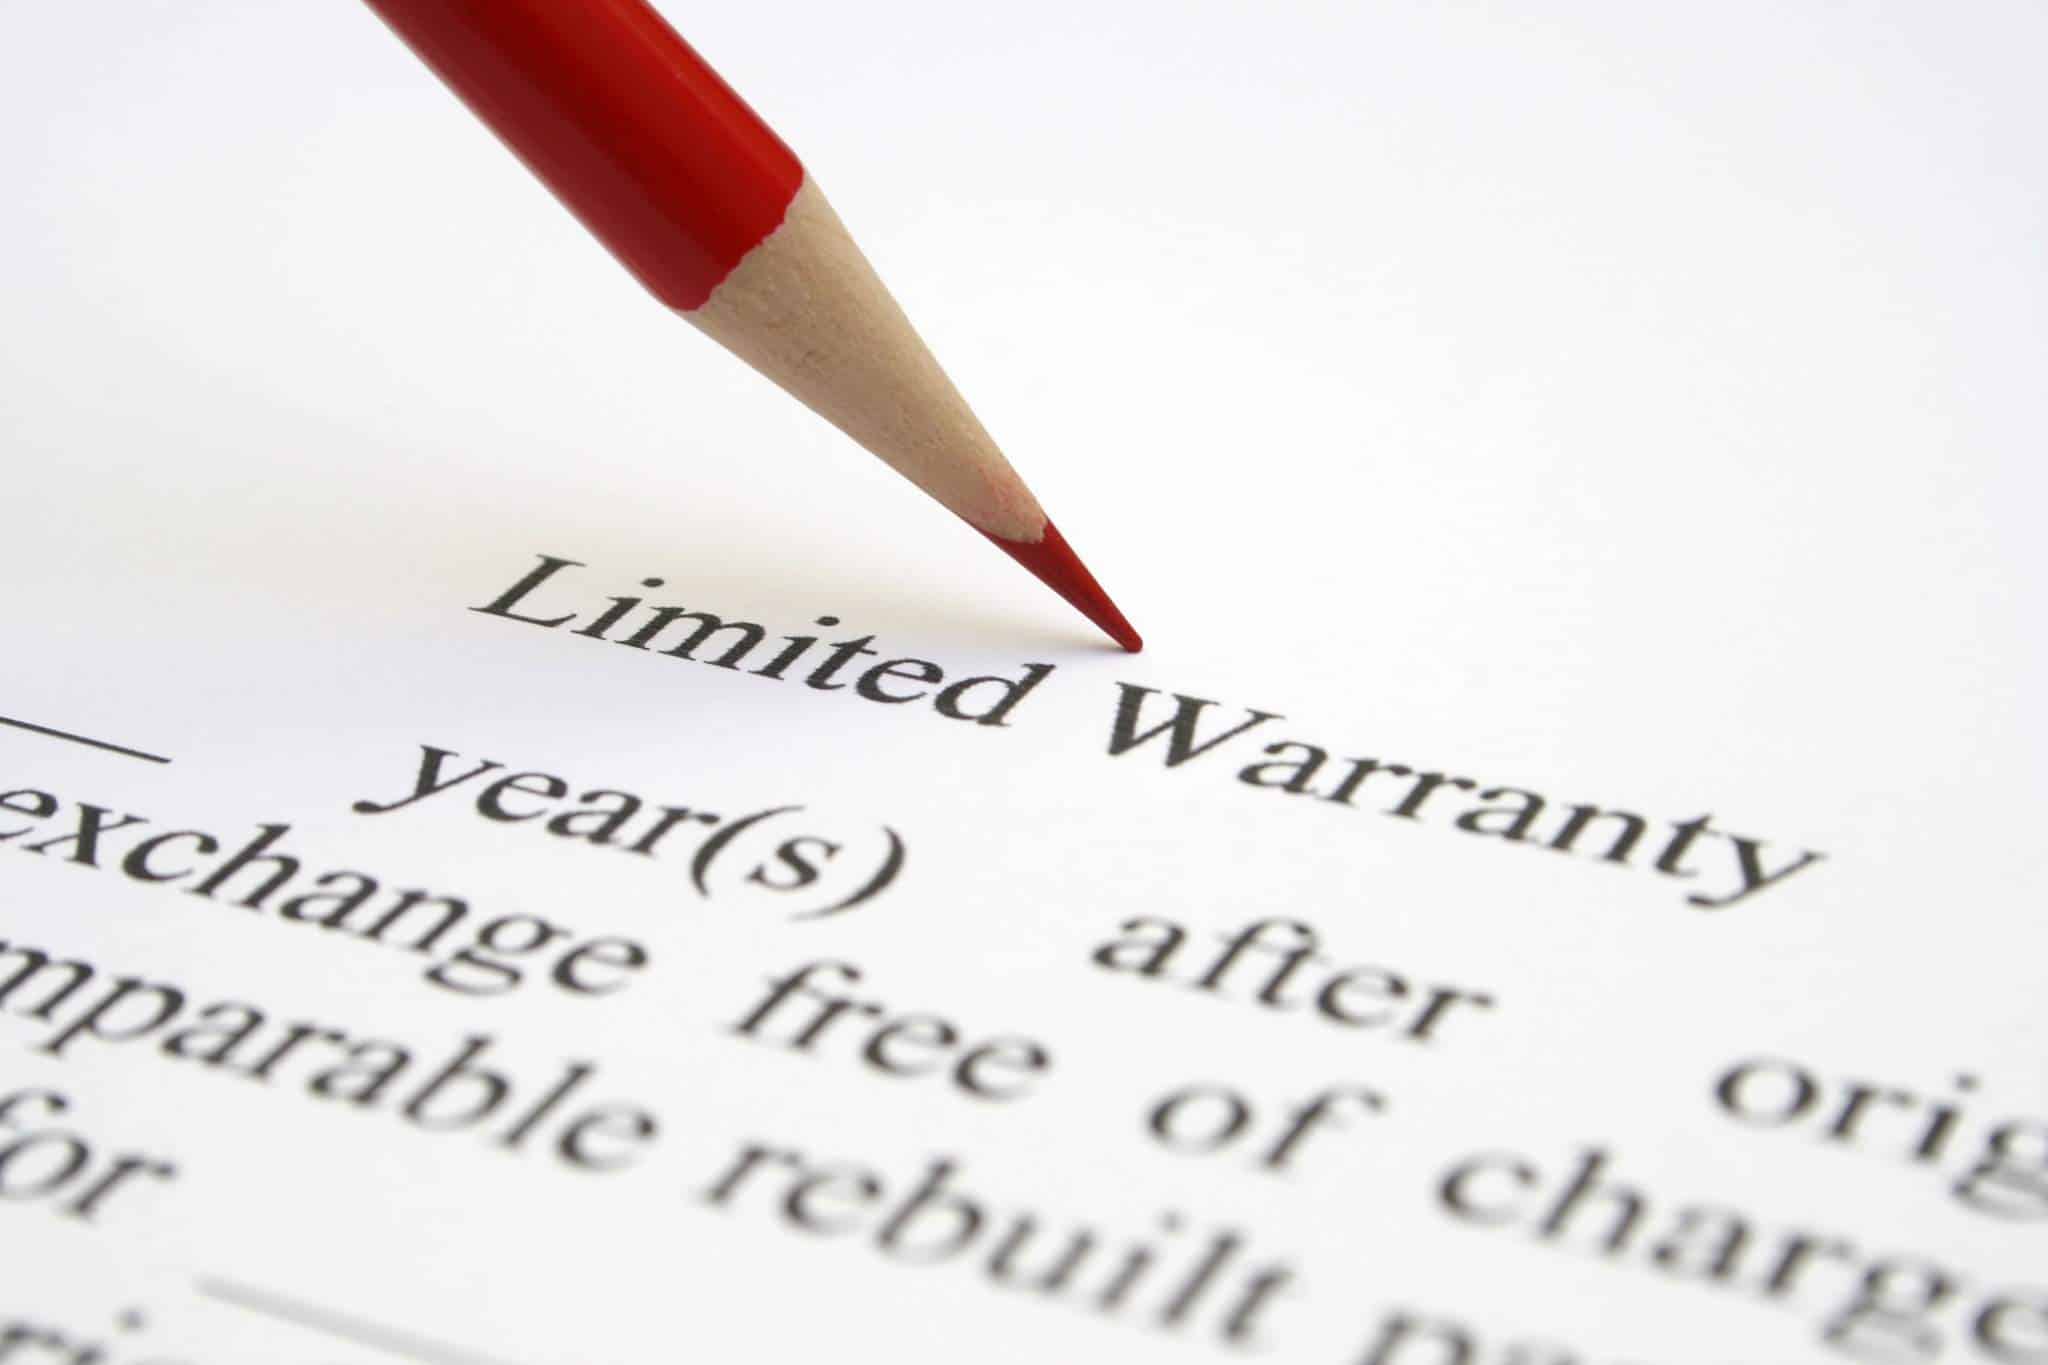 Car Warranties are not as important as you may think! Here’s why.